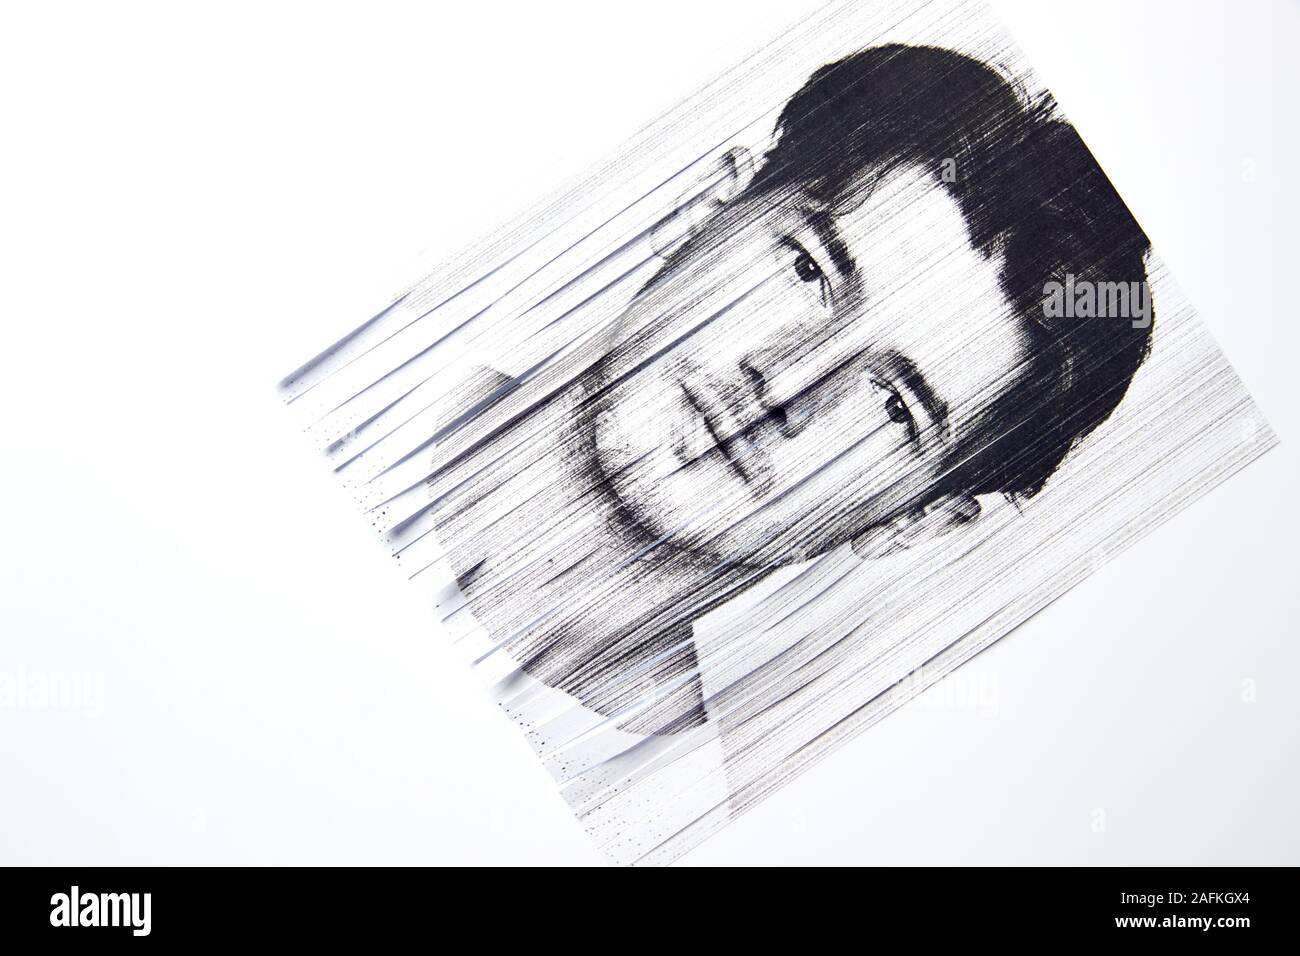 Mental Health Concept With Monochrome Picture Of Man Passed Through Paper Shredder Stock Photo